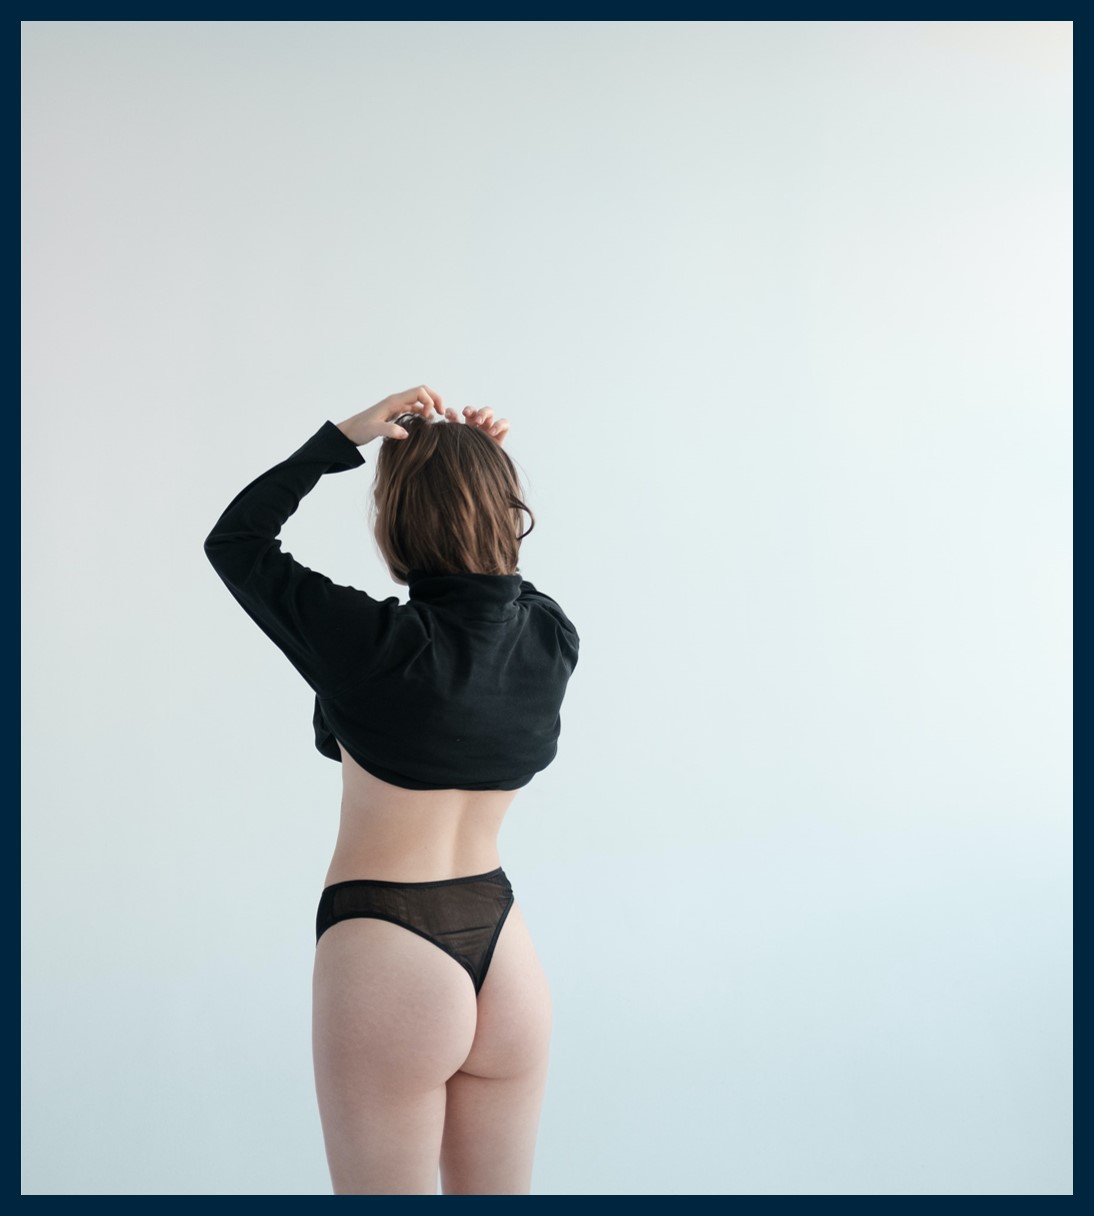 A woman standing in a white room, wearing a black shirt and underpants.